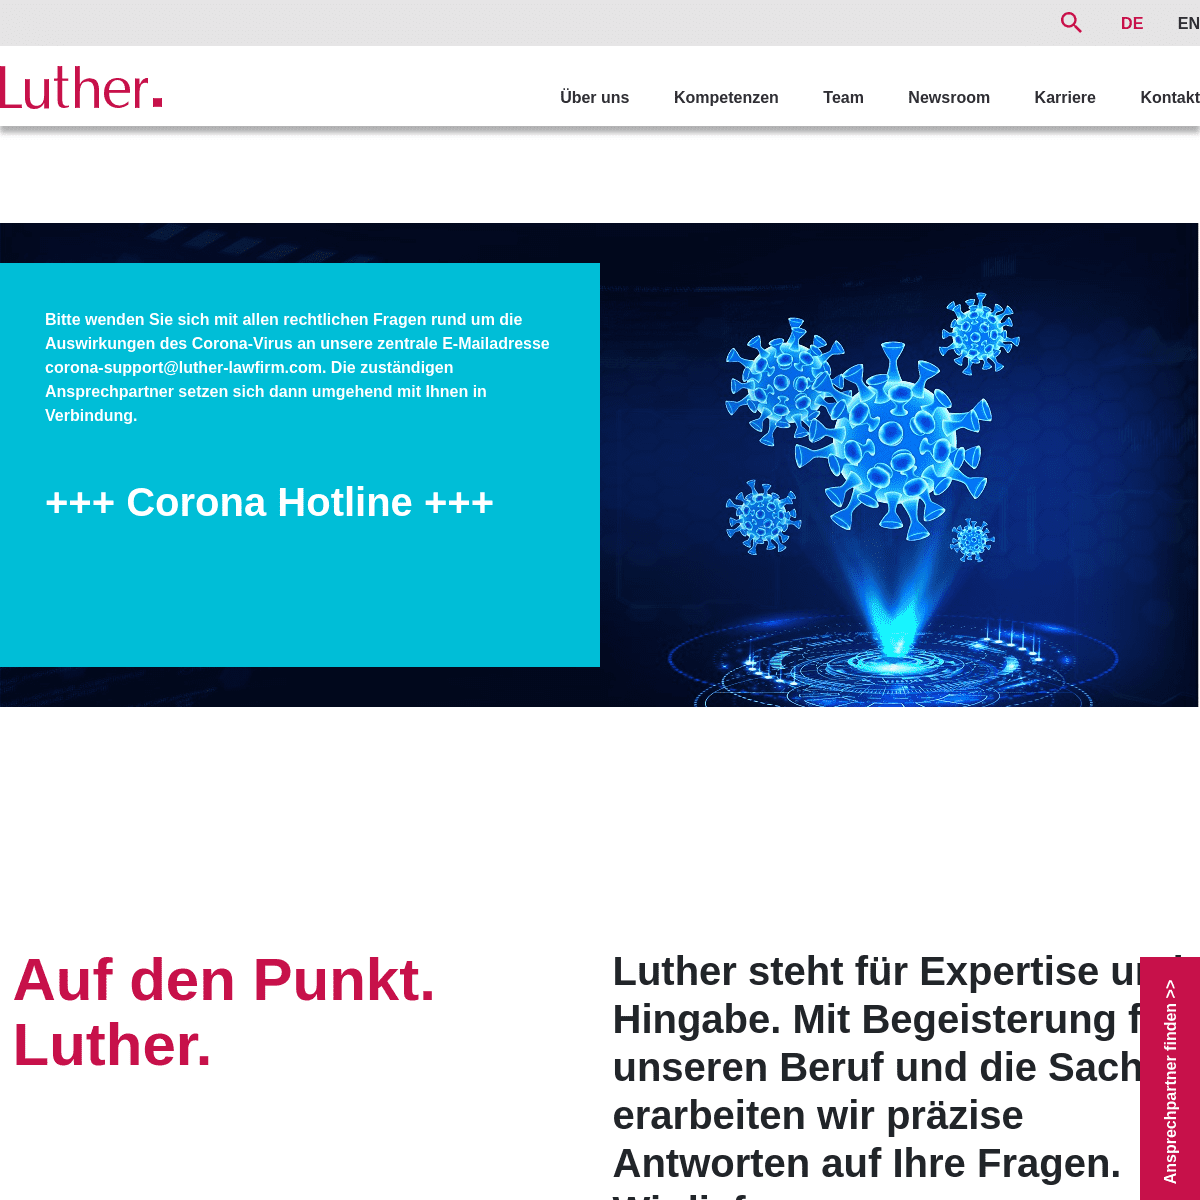 A complete backup of luther-lawfirm.com